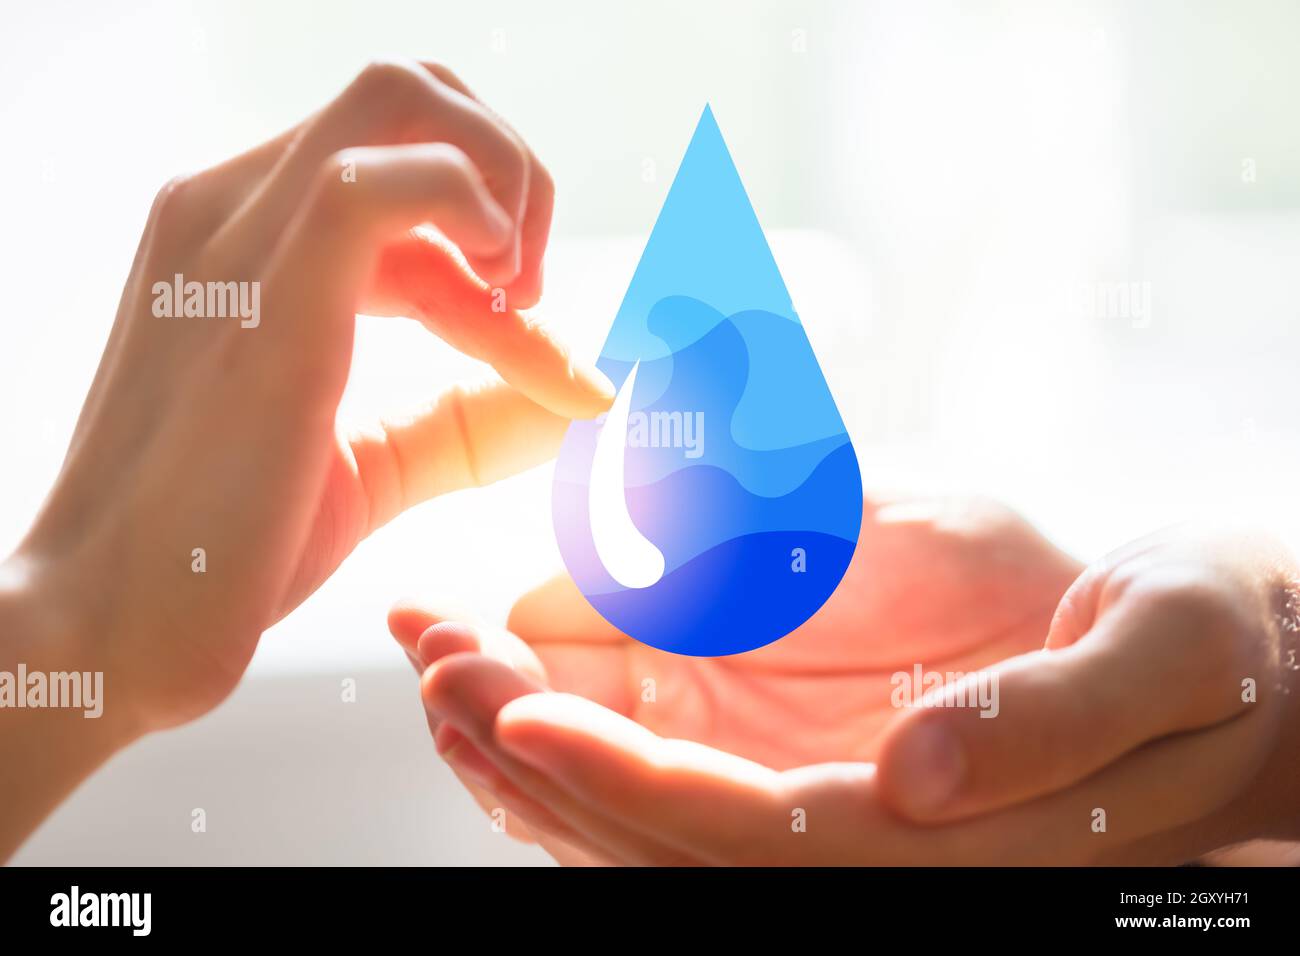 Save Fresh Water. Environment Energy Conservation And Sustainability Stock Photo